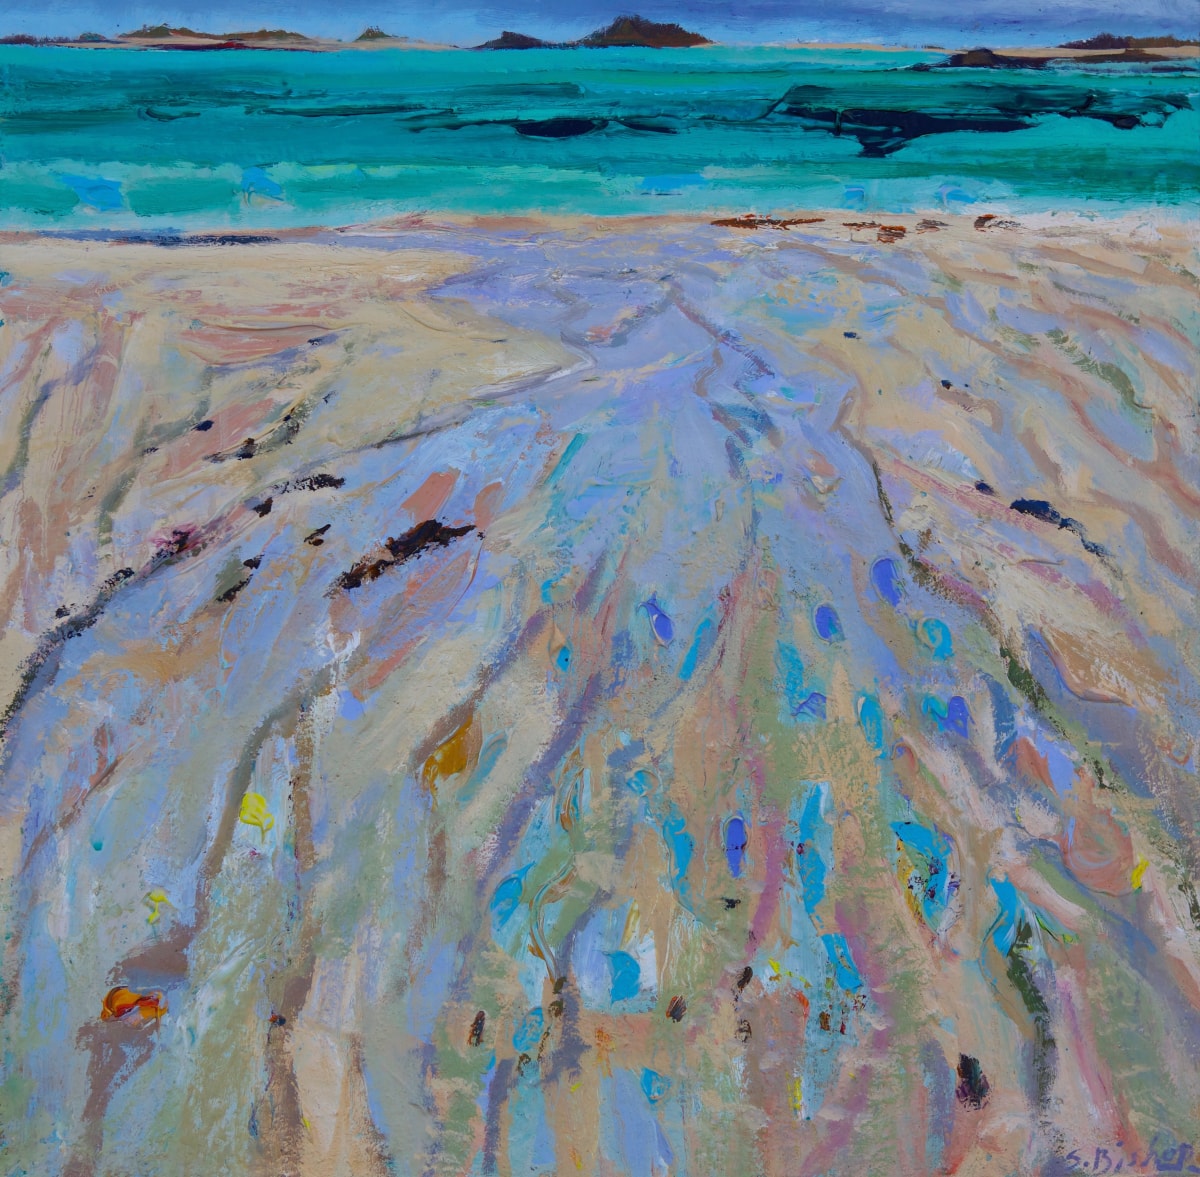 The Shore by Stephen Bishop  Image: Available from Gallery Tresco 

https://www.tresco.co.uk/enjoying/gallery-tresco/artists/stephen-bishop